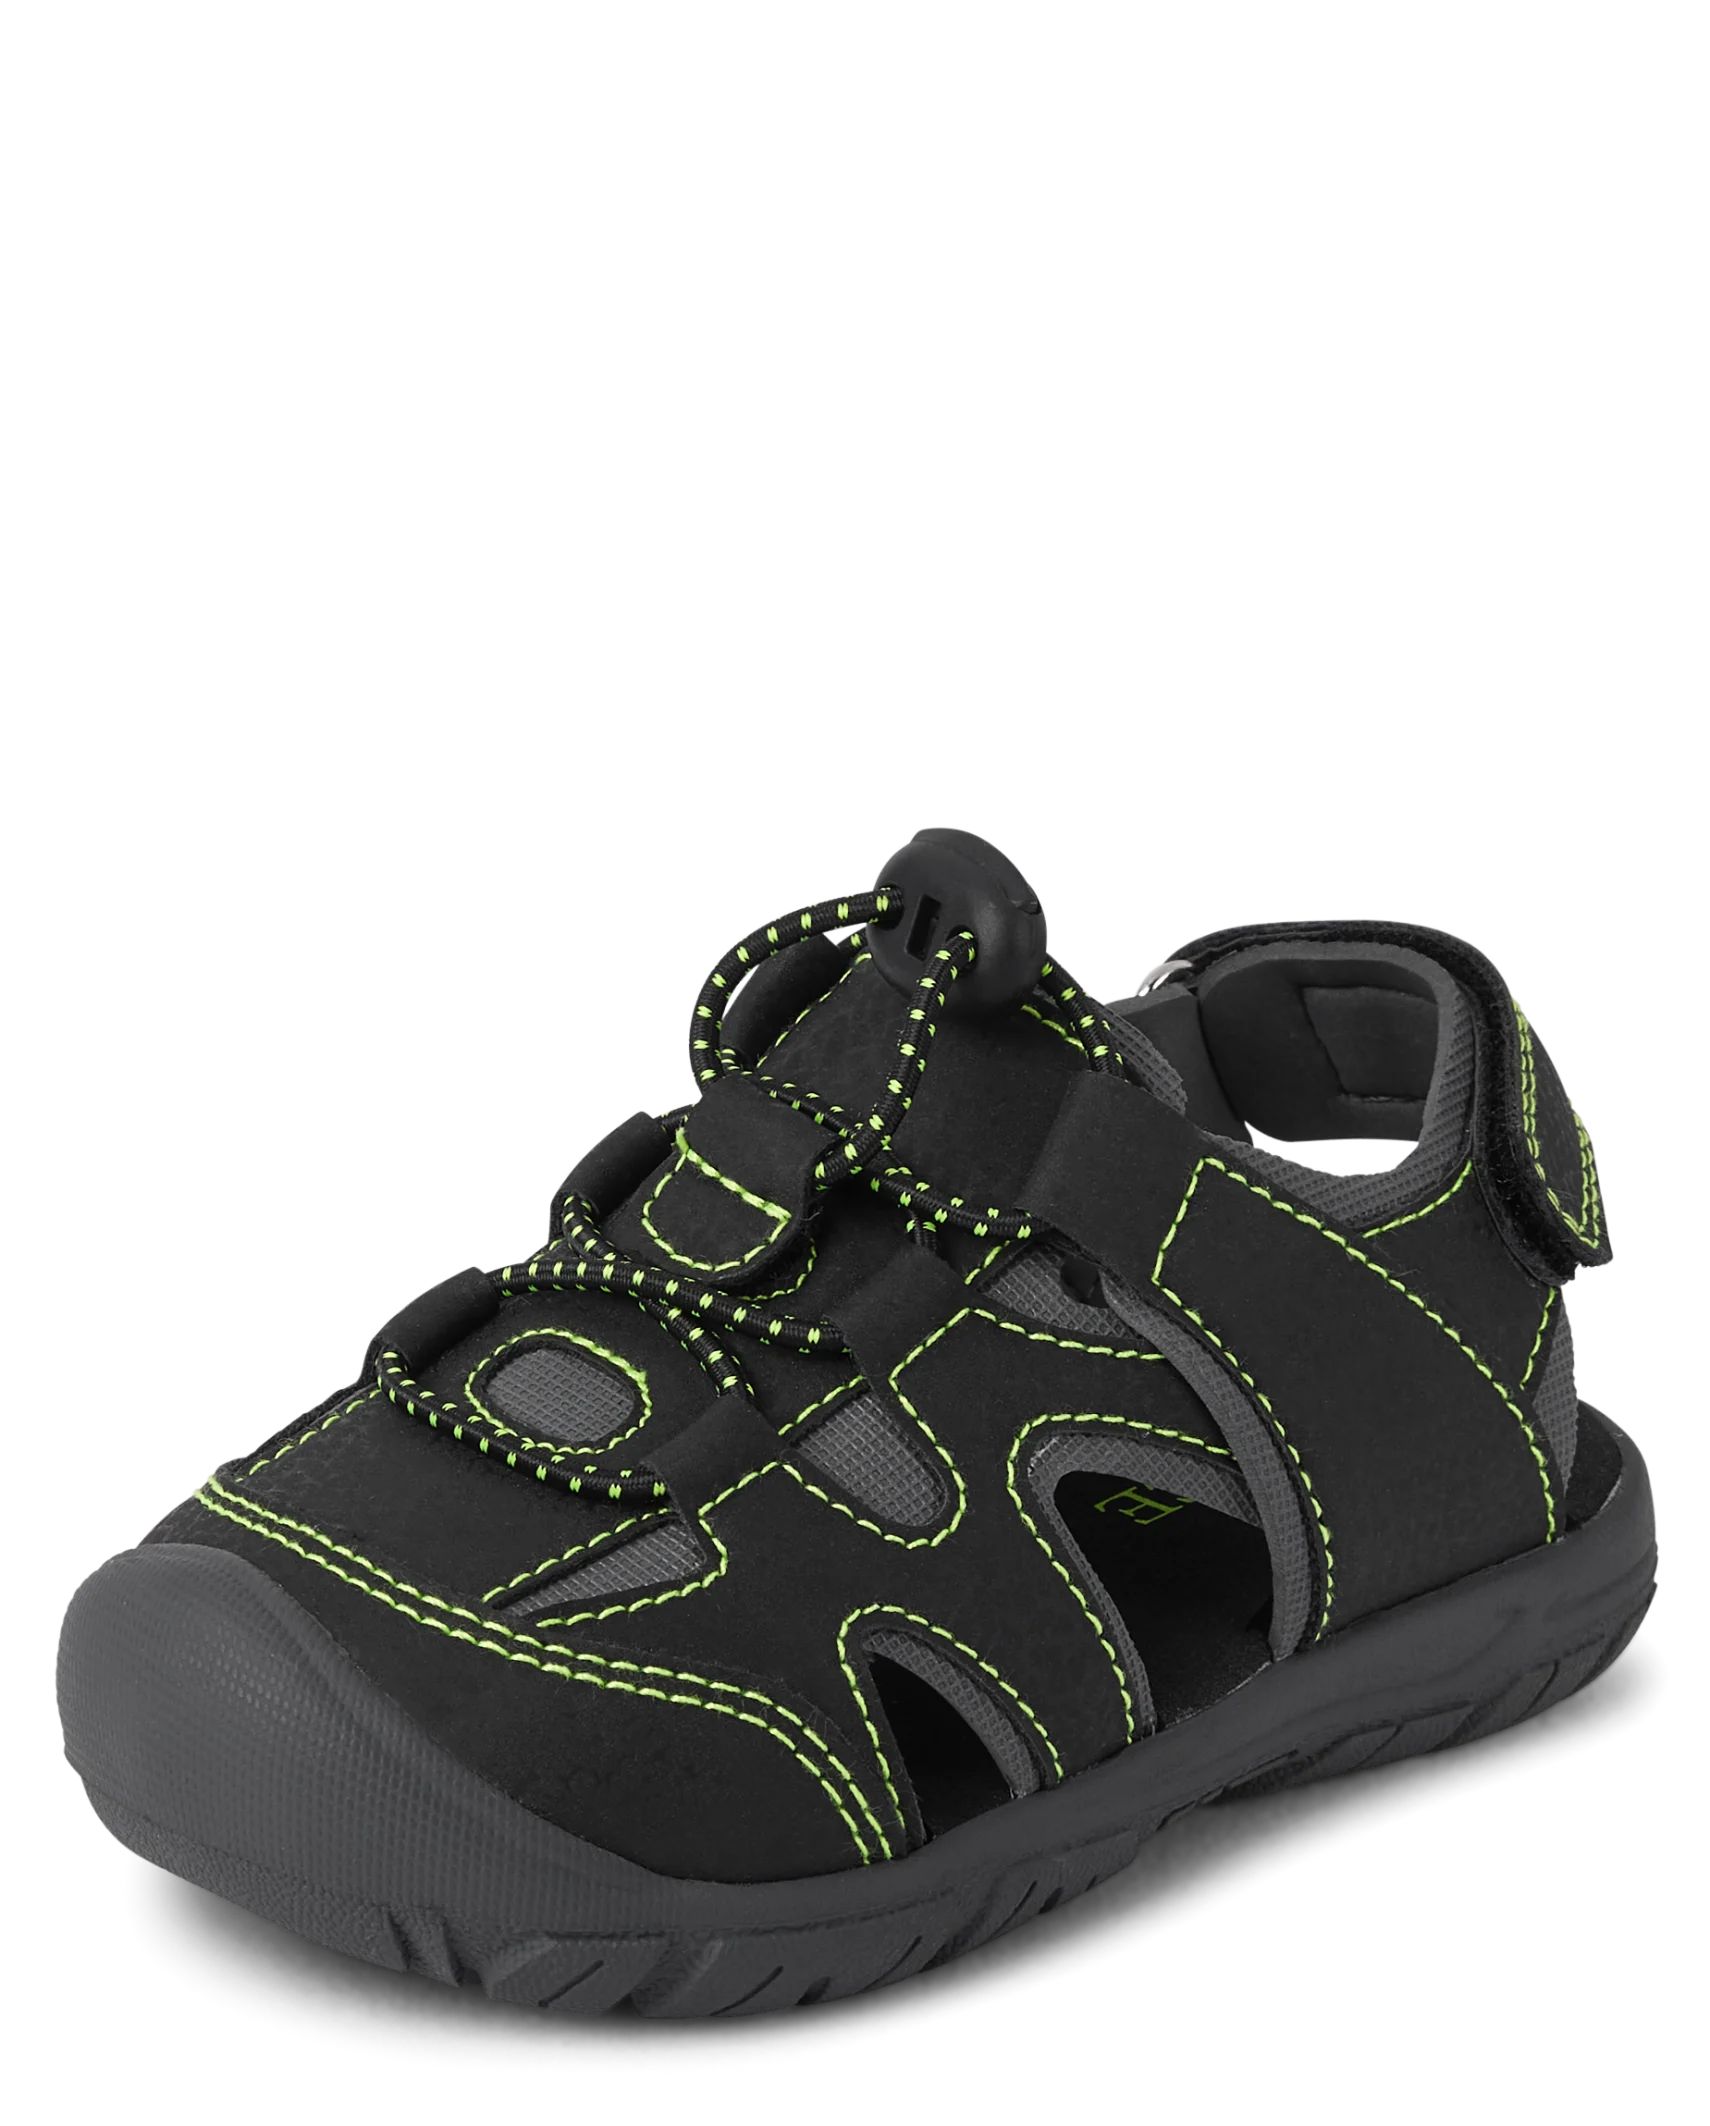 Toddler Boys Fisherman Sandals | The Children's Place  - BLACK | The Children's Place